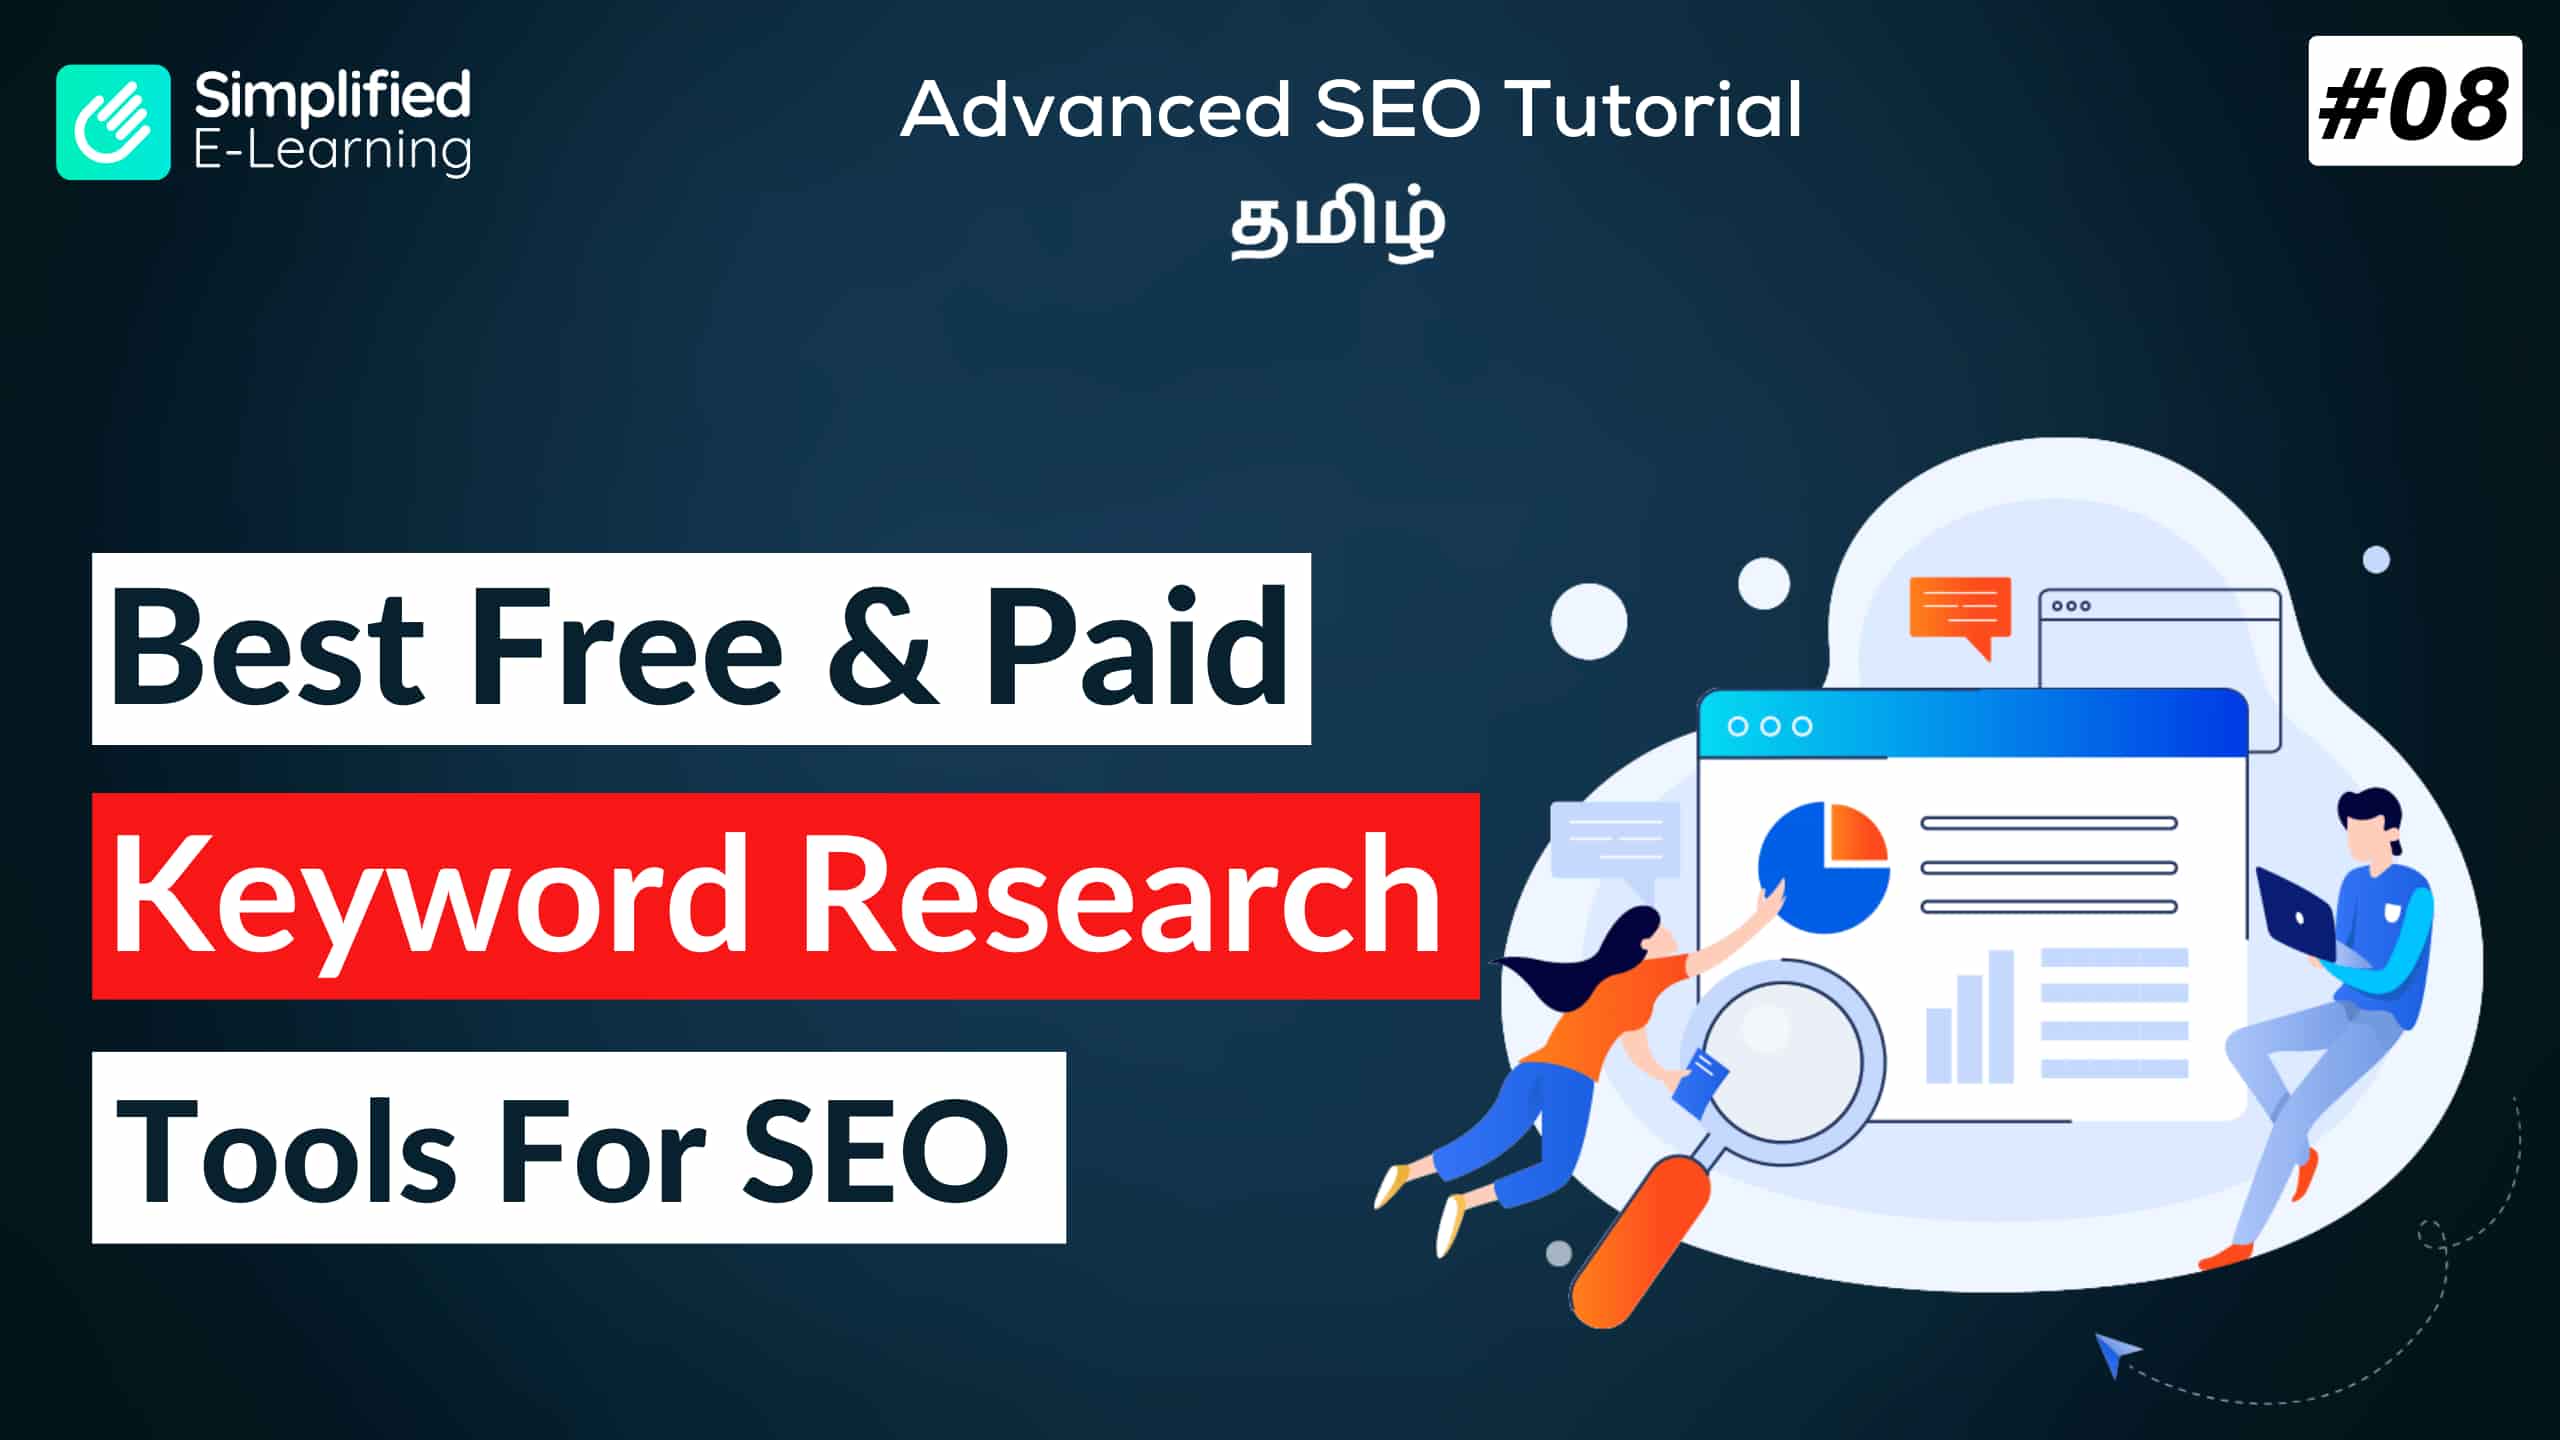 Keyword Research Tools For SEO